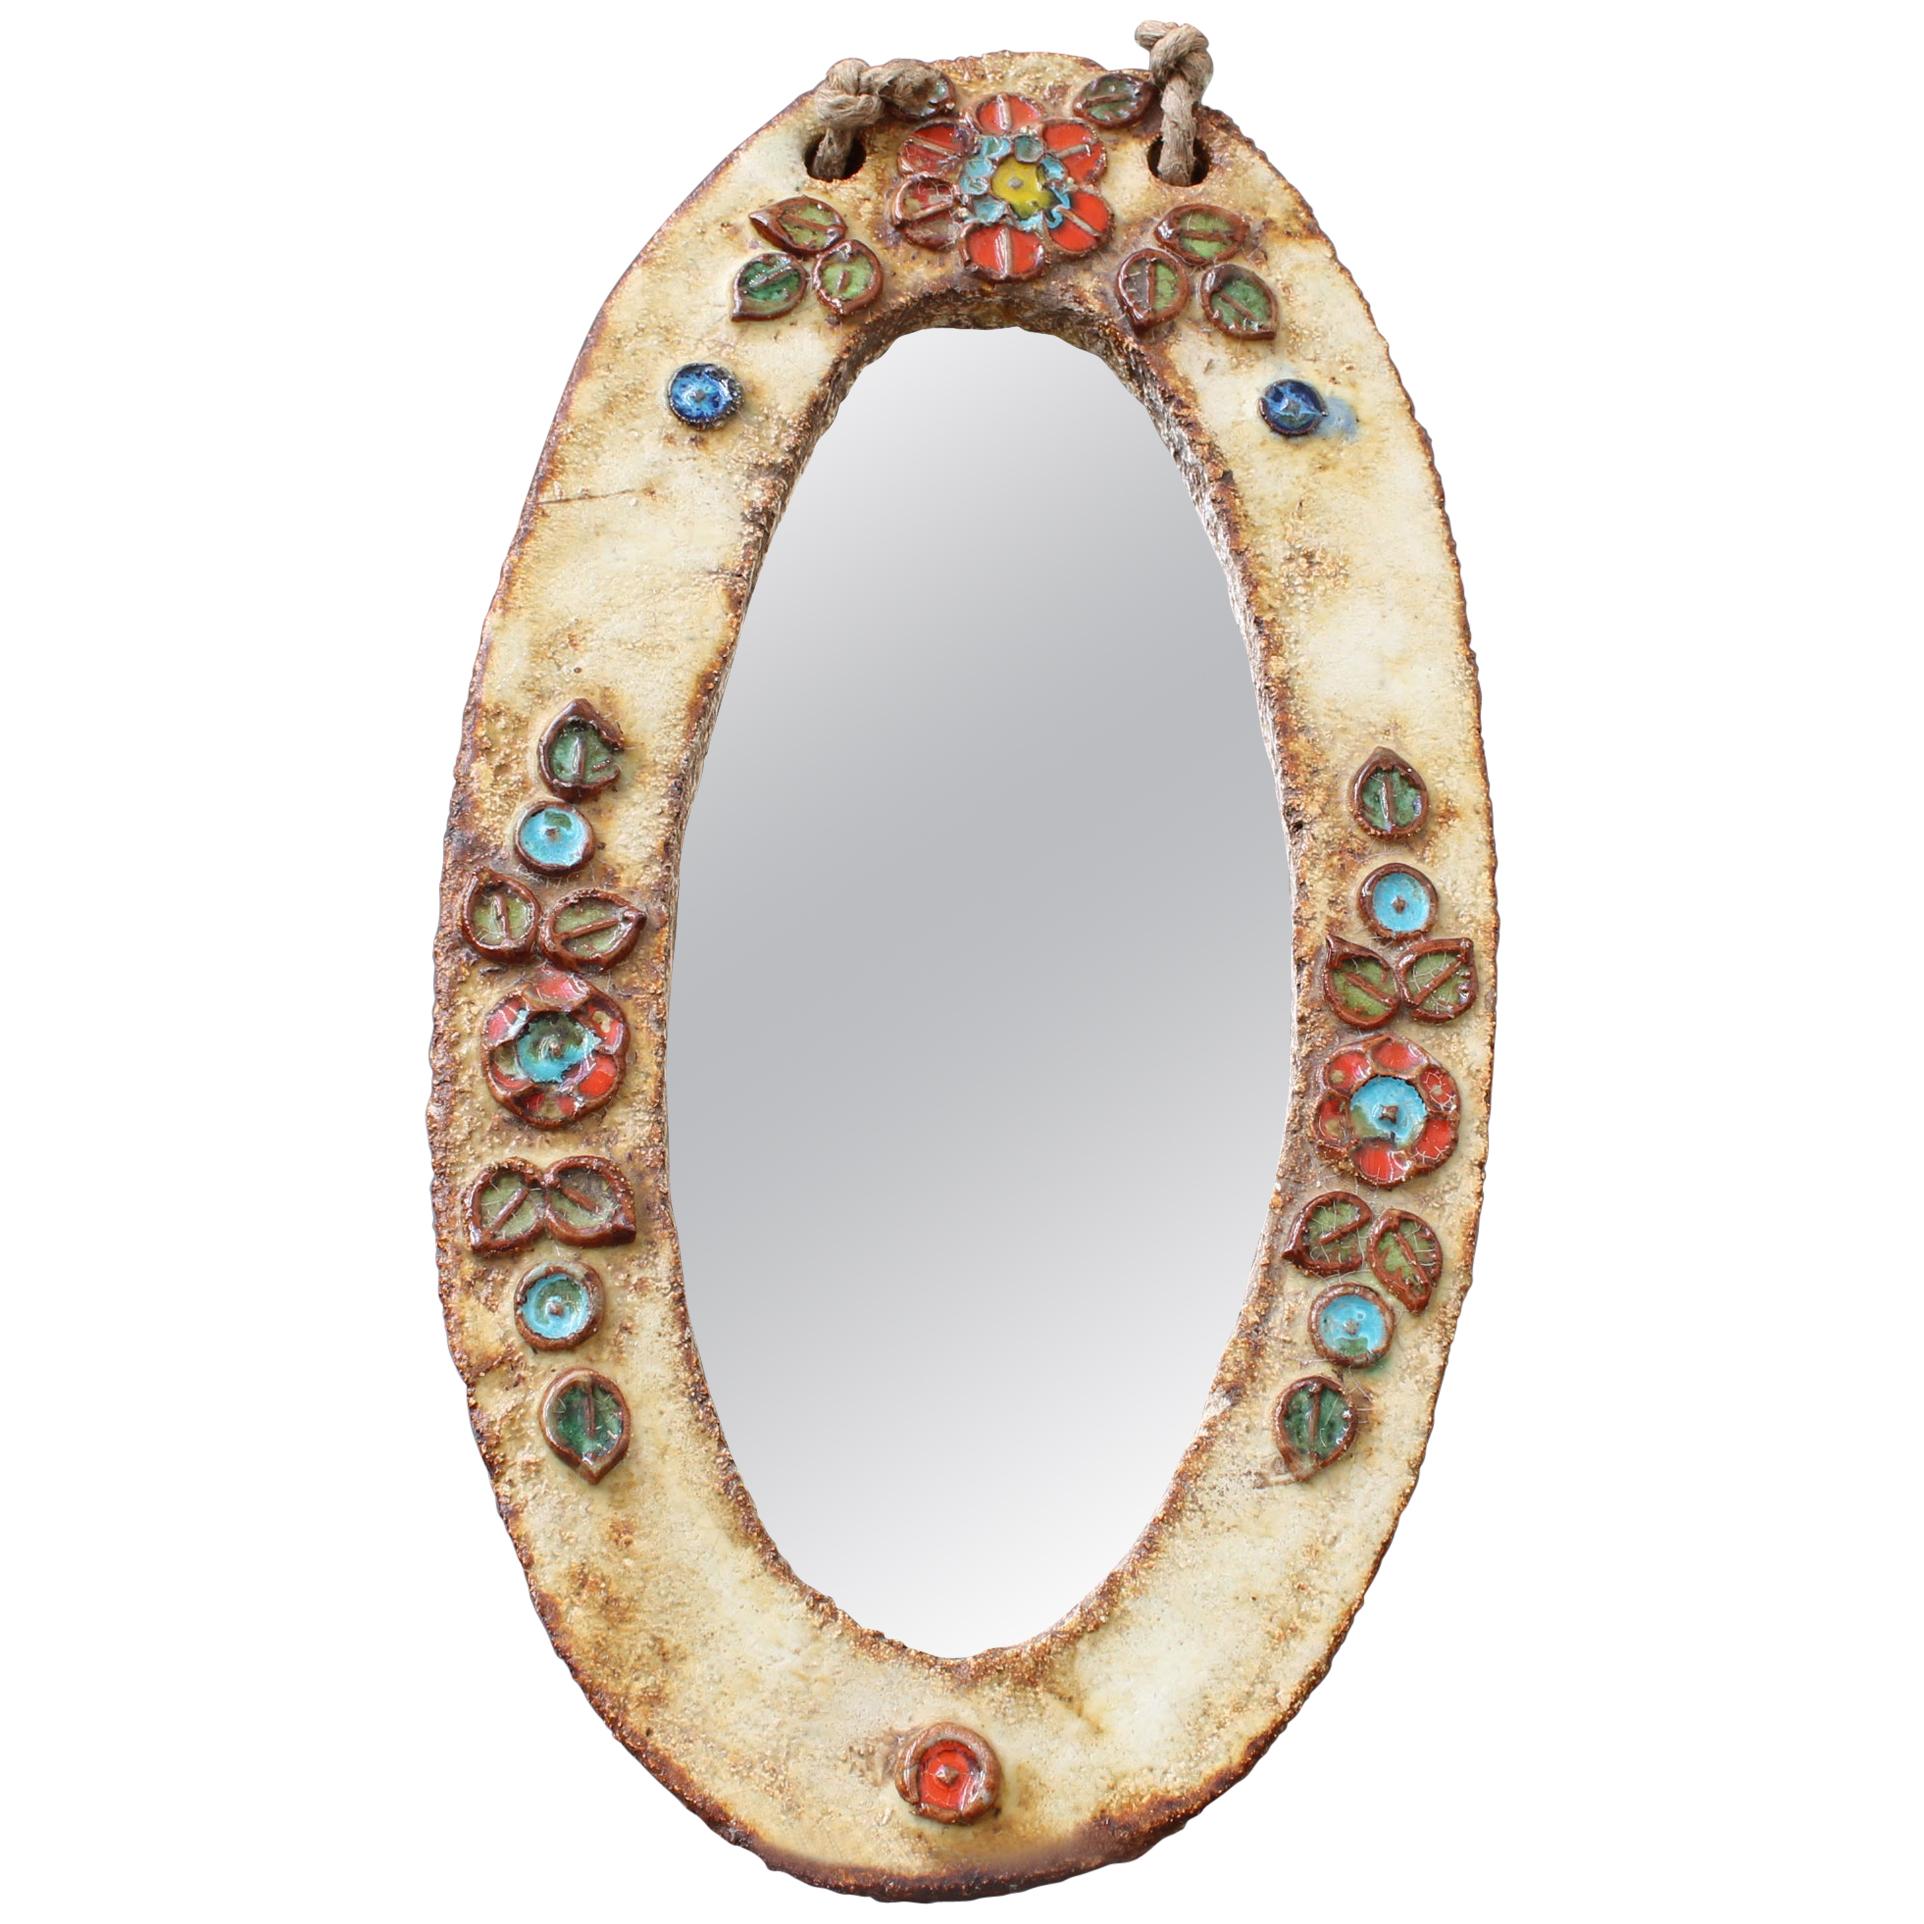 Ceramic Oval Wall Mirror with Floral Enamel Decoration by Atelier La Roue